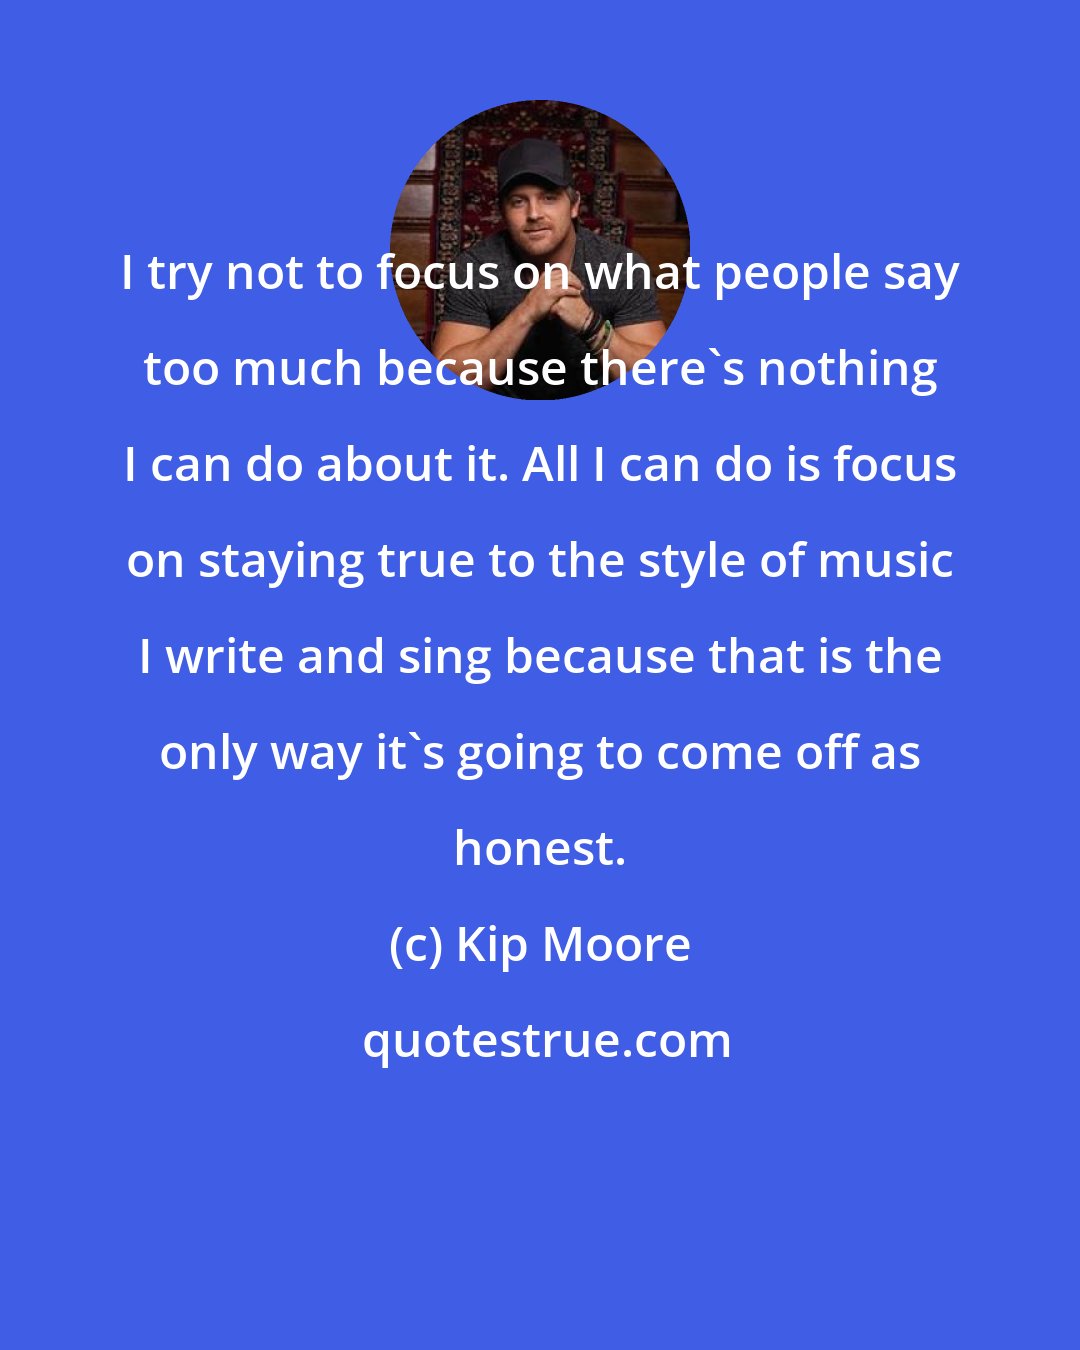 Kip Moore: I try not to focus on what people say too much because there's nothing I can do about it. All I can do is focus on staying true to the style of music I write and sing because that is the only way it's going to come off as honest.